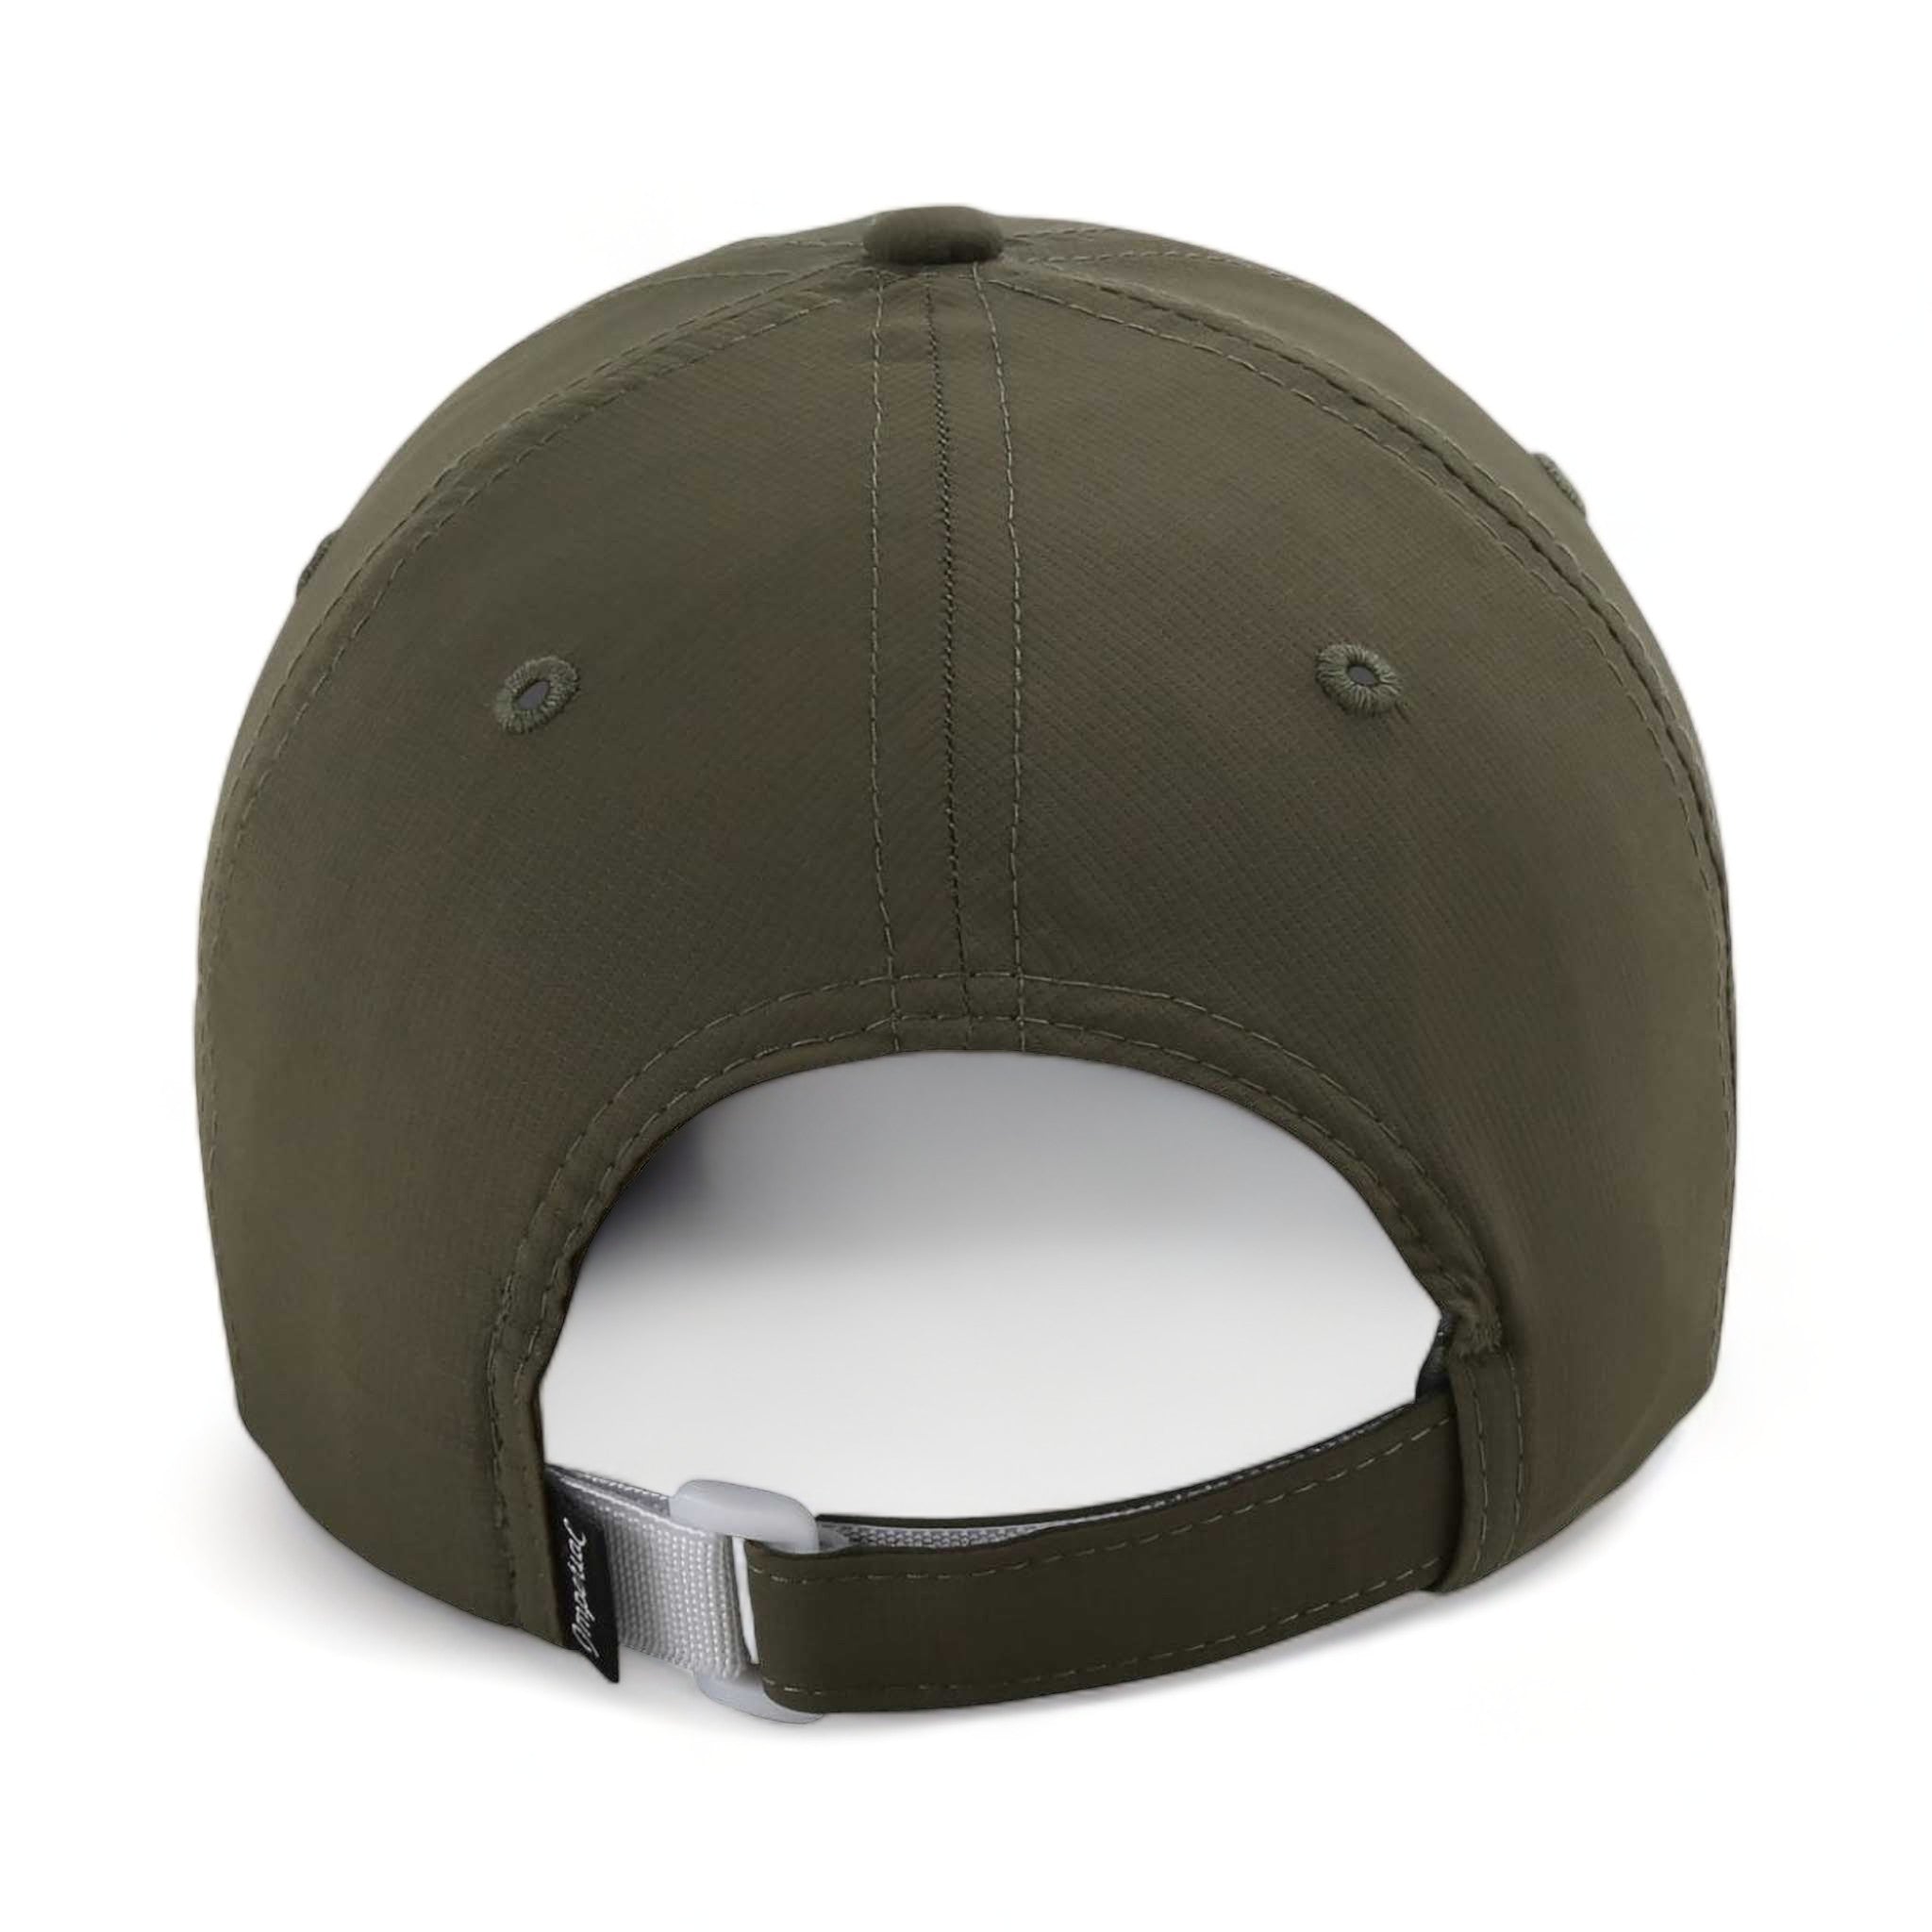 Back view of Imperial X210P custom hat in olive